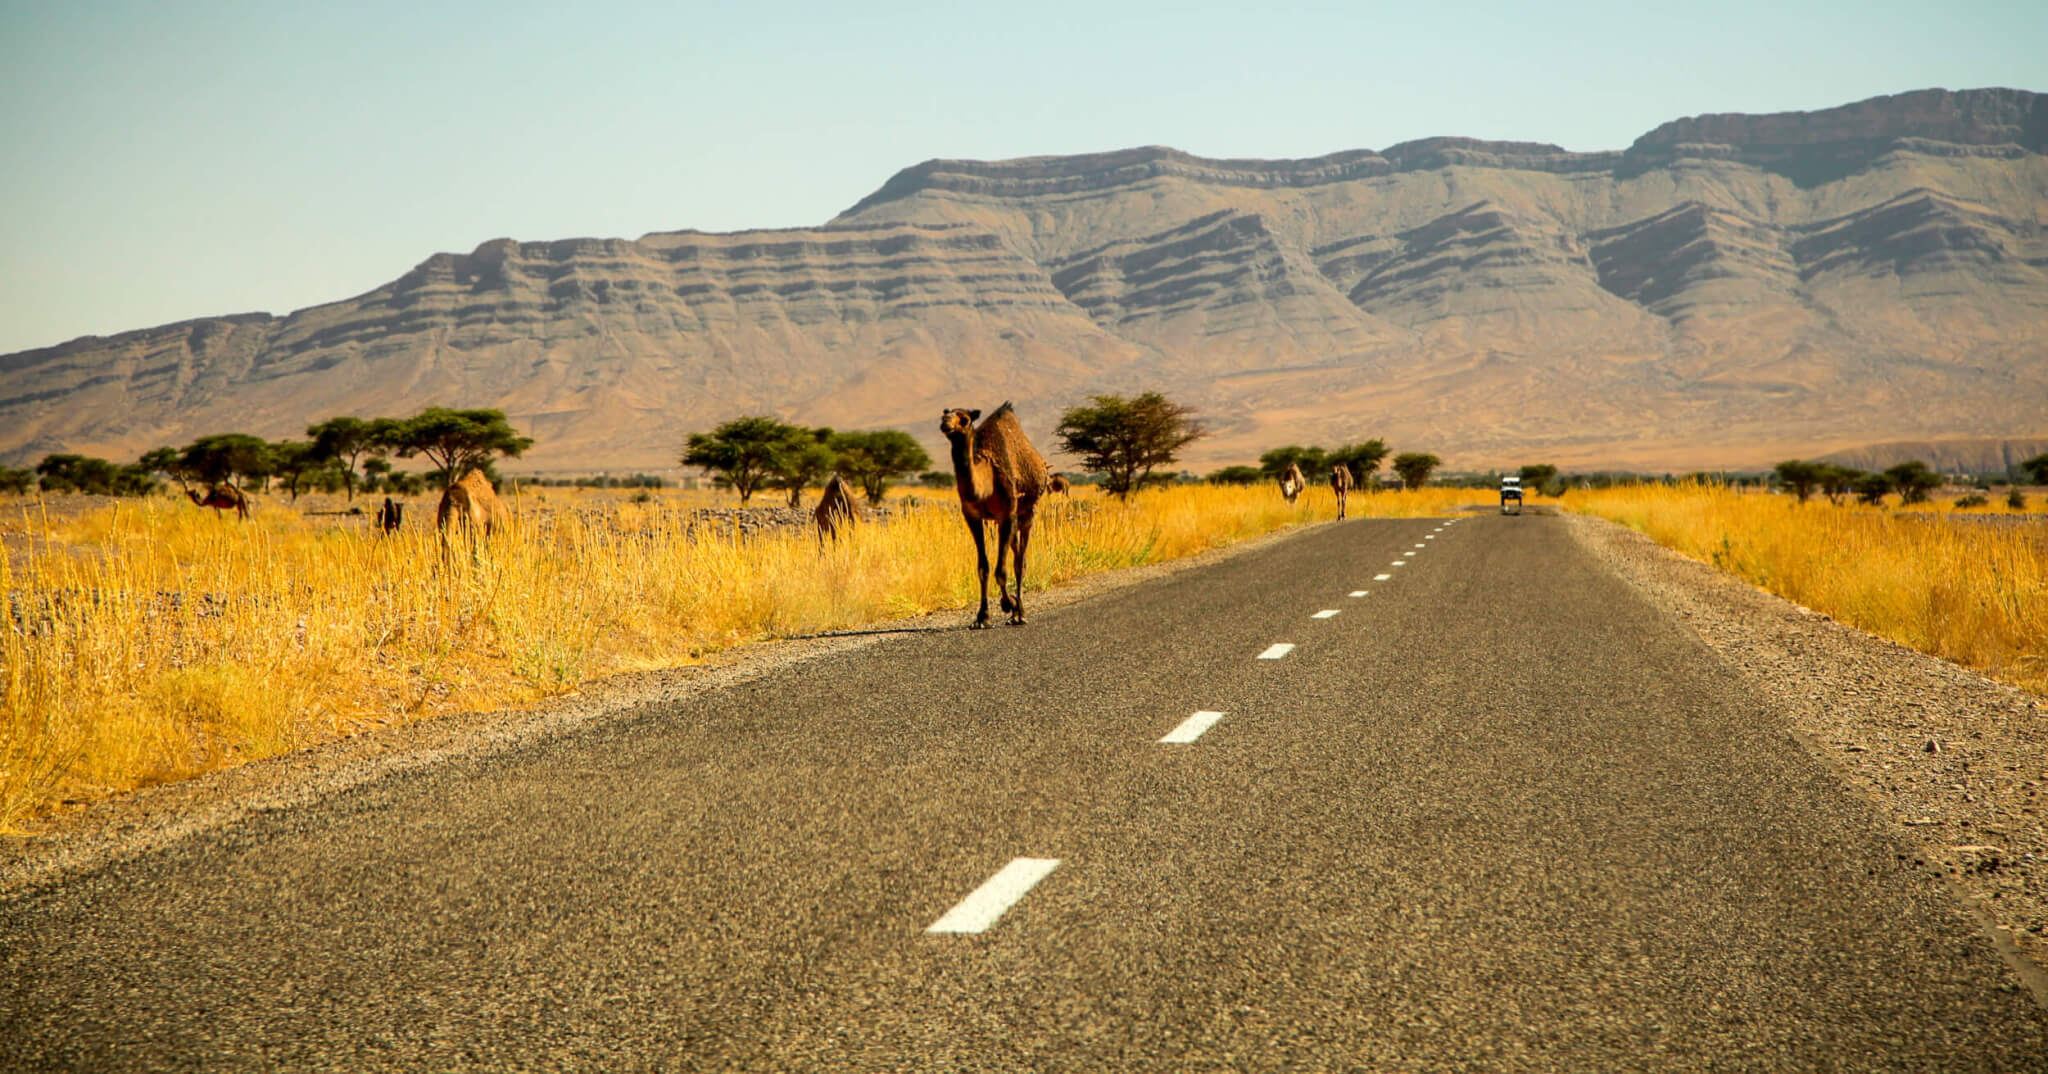 Camels along the road Ouarzzazate Morocco